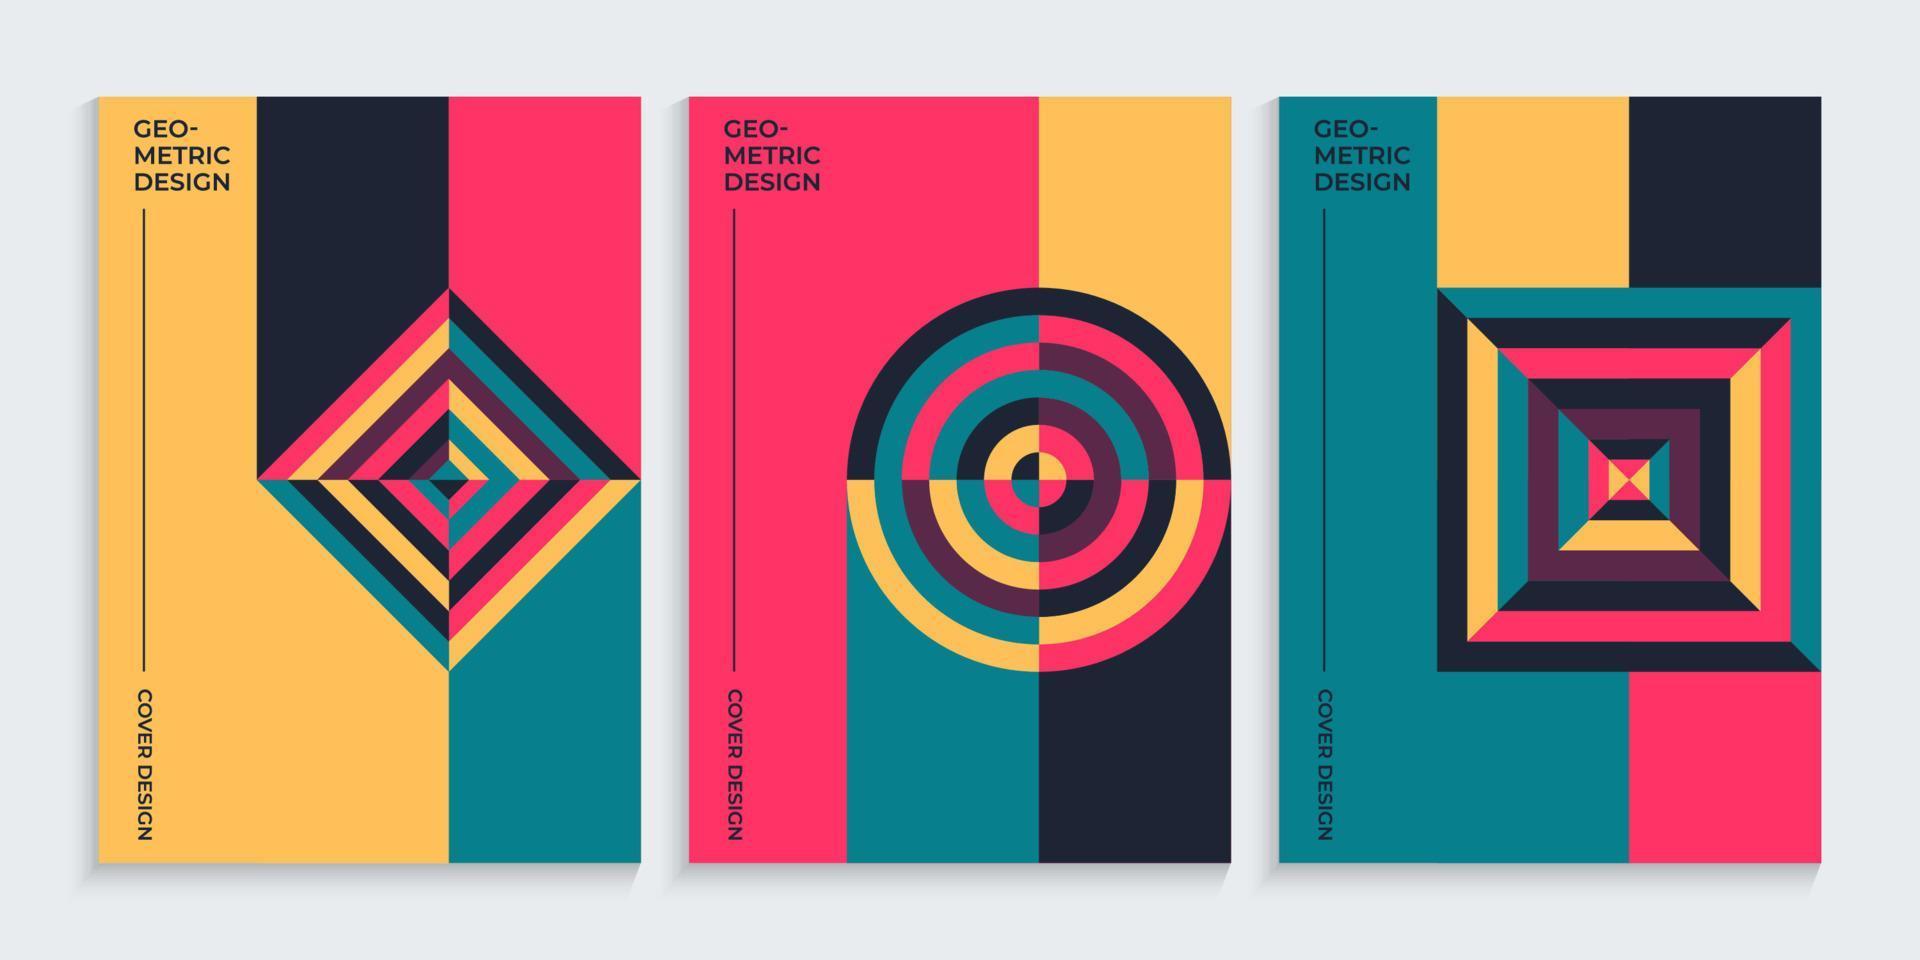 Geometric bauhaus book covers collection in retro minimal shapes style vector